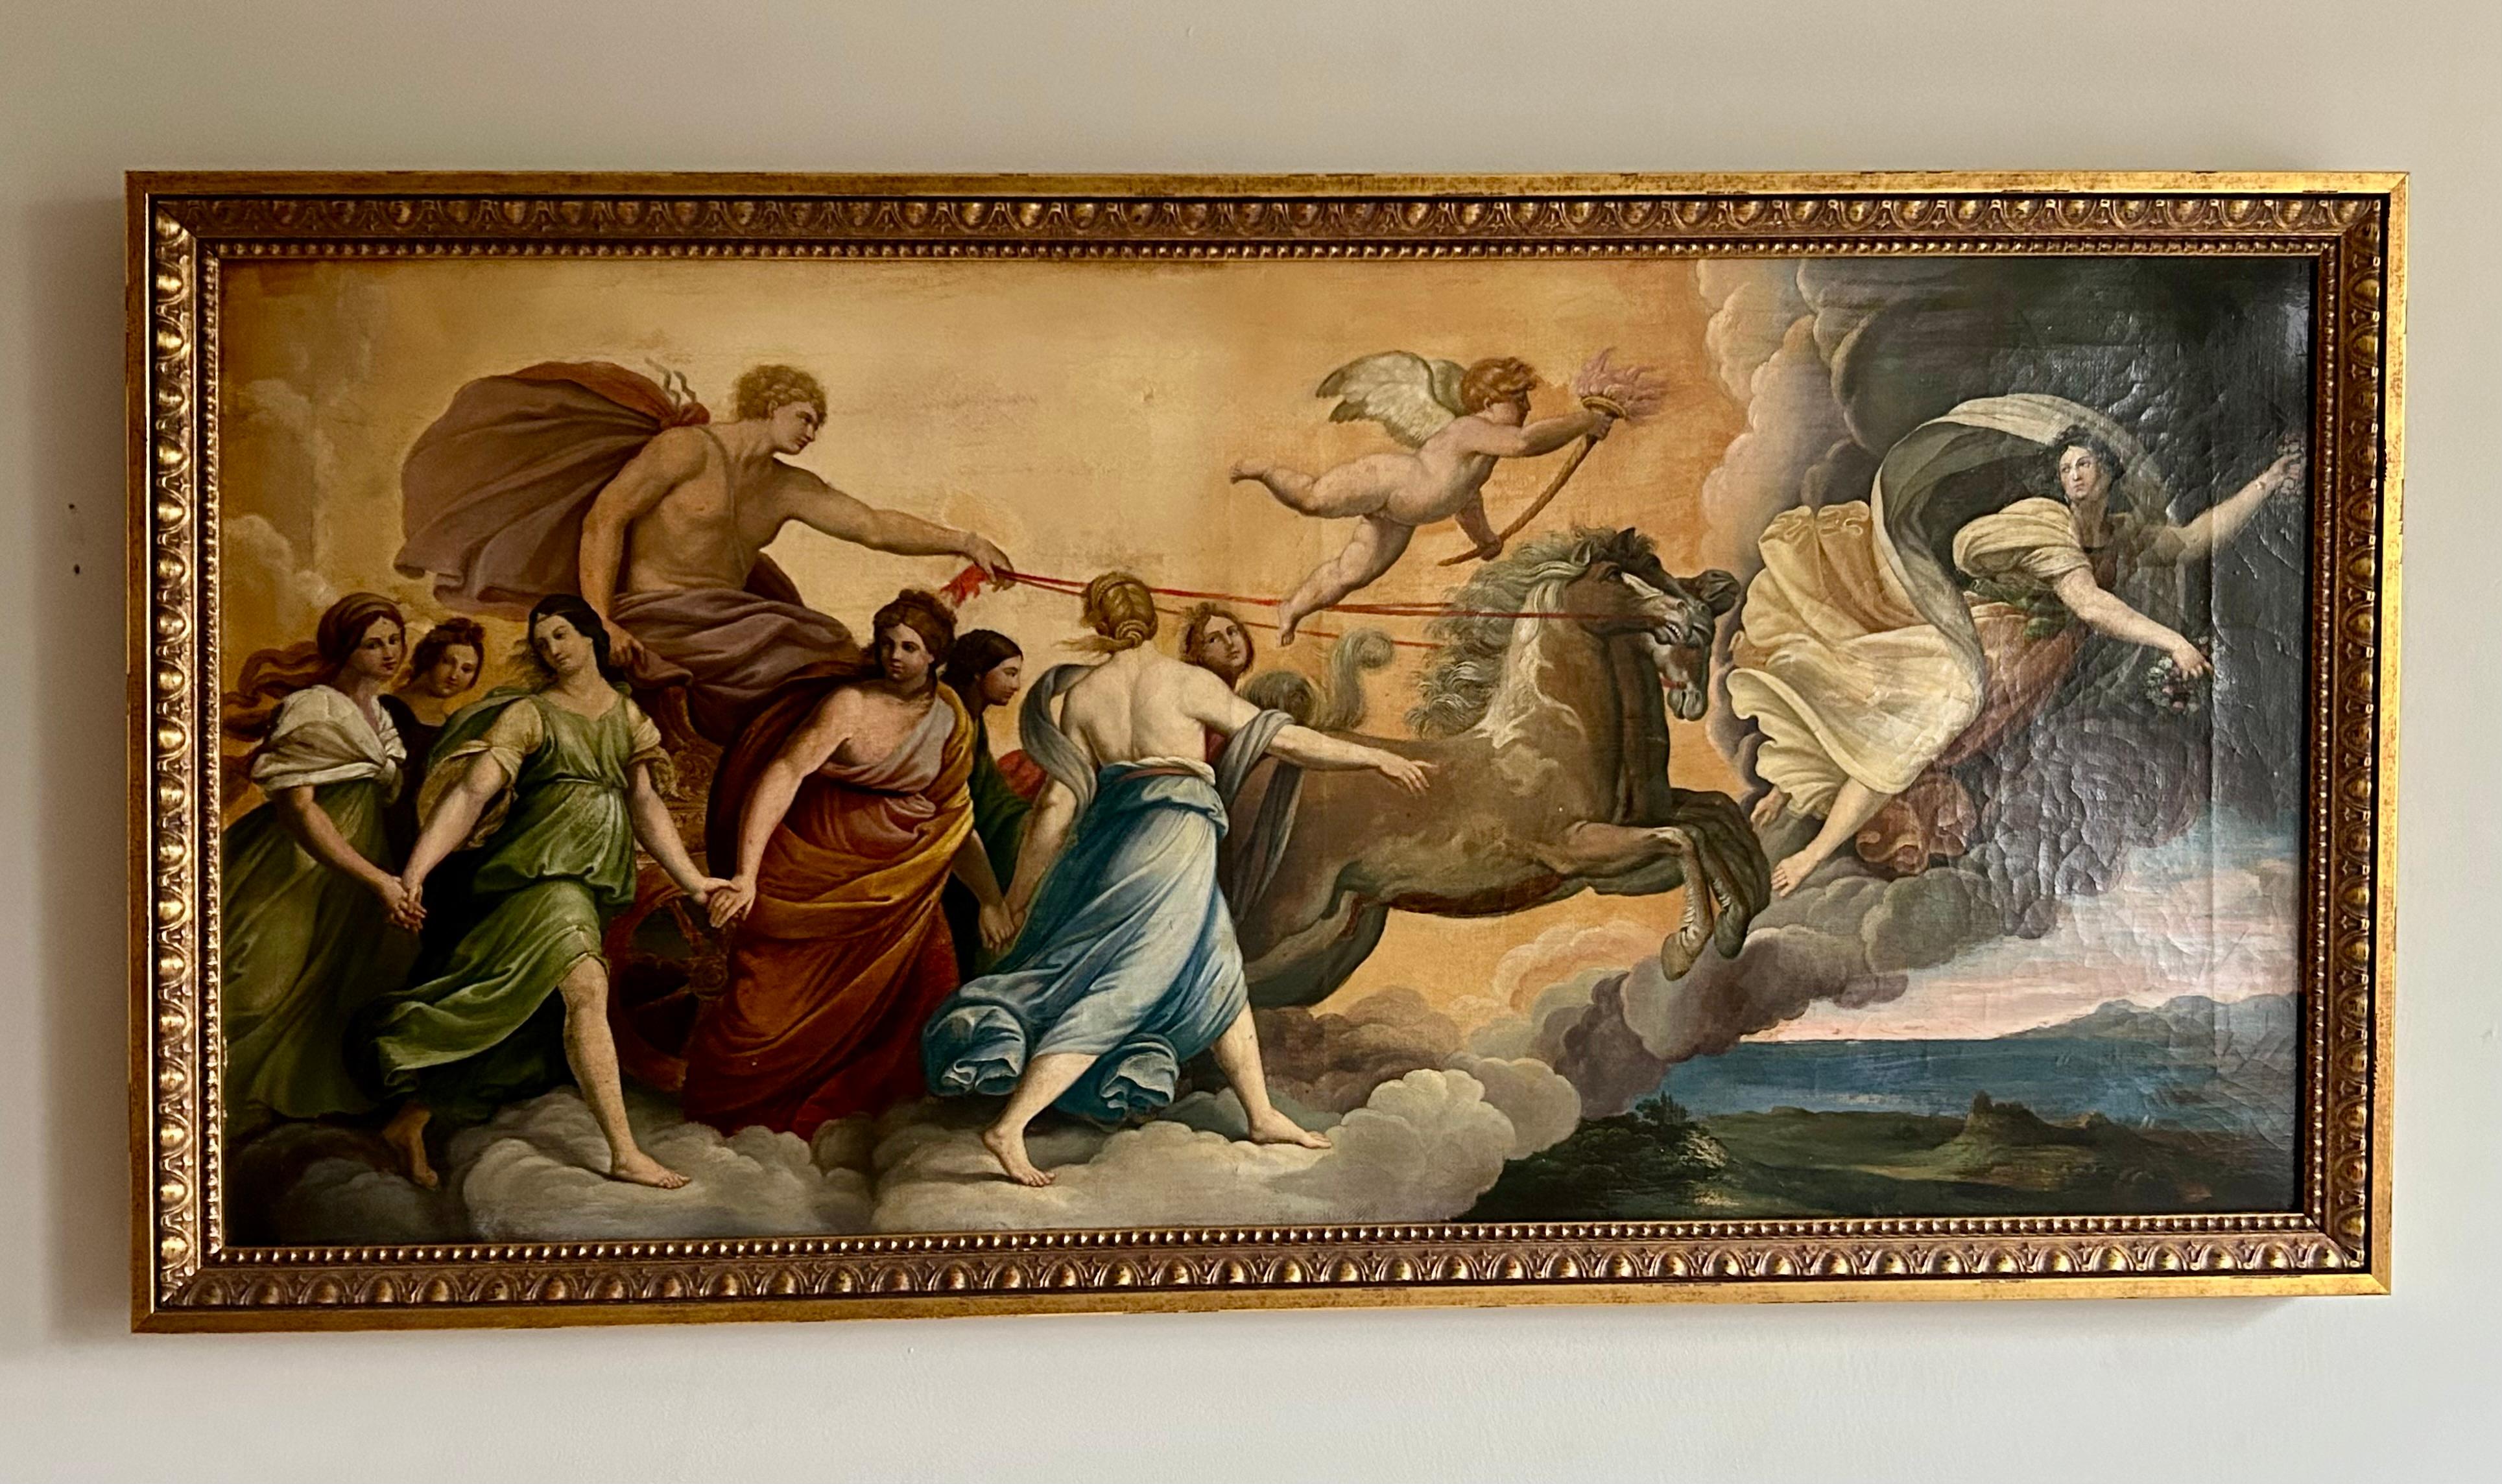 Wonderful 19th century copy of Guido Reni's masterpiece, The Aurora,  a large Baroque ceiling fresco painted  in 1614 for the Casino, or garden house, adjacent to the Palazzo Pallavicini-Rospigliosi, in Rome. The work is considered Reni's